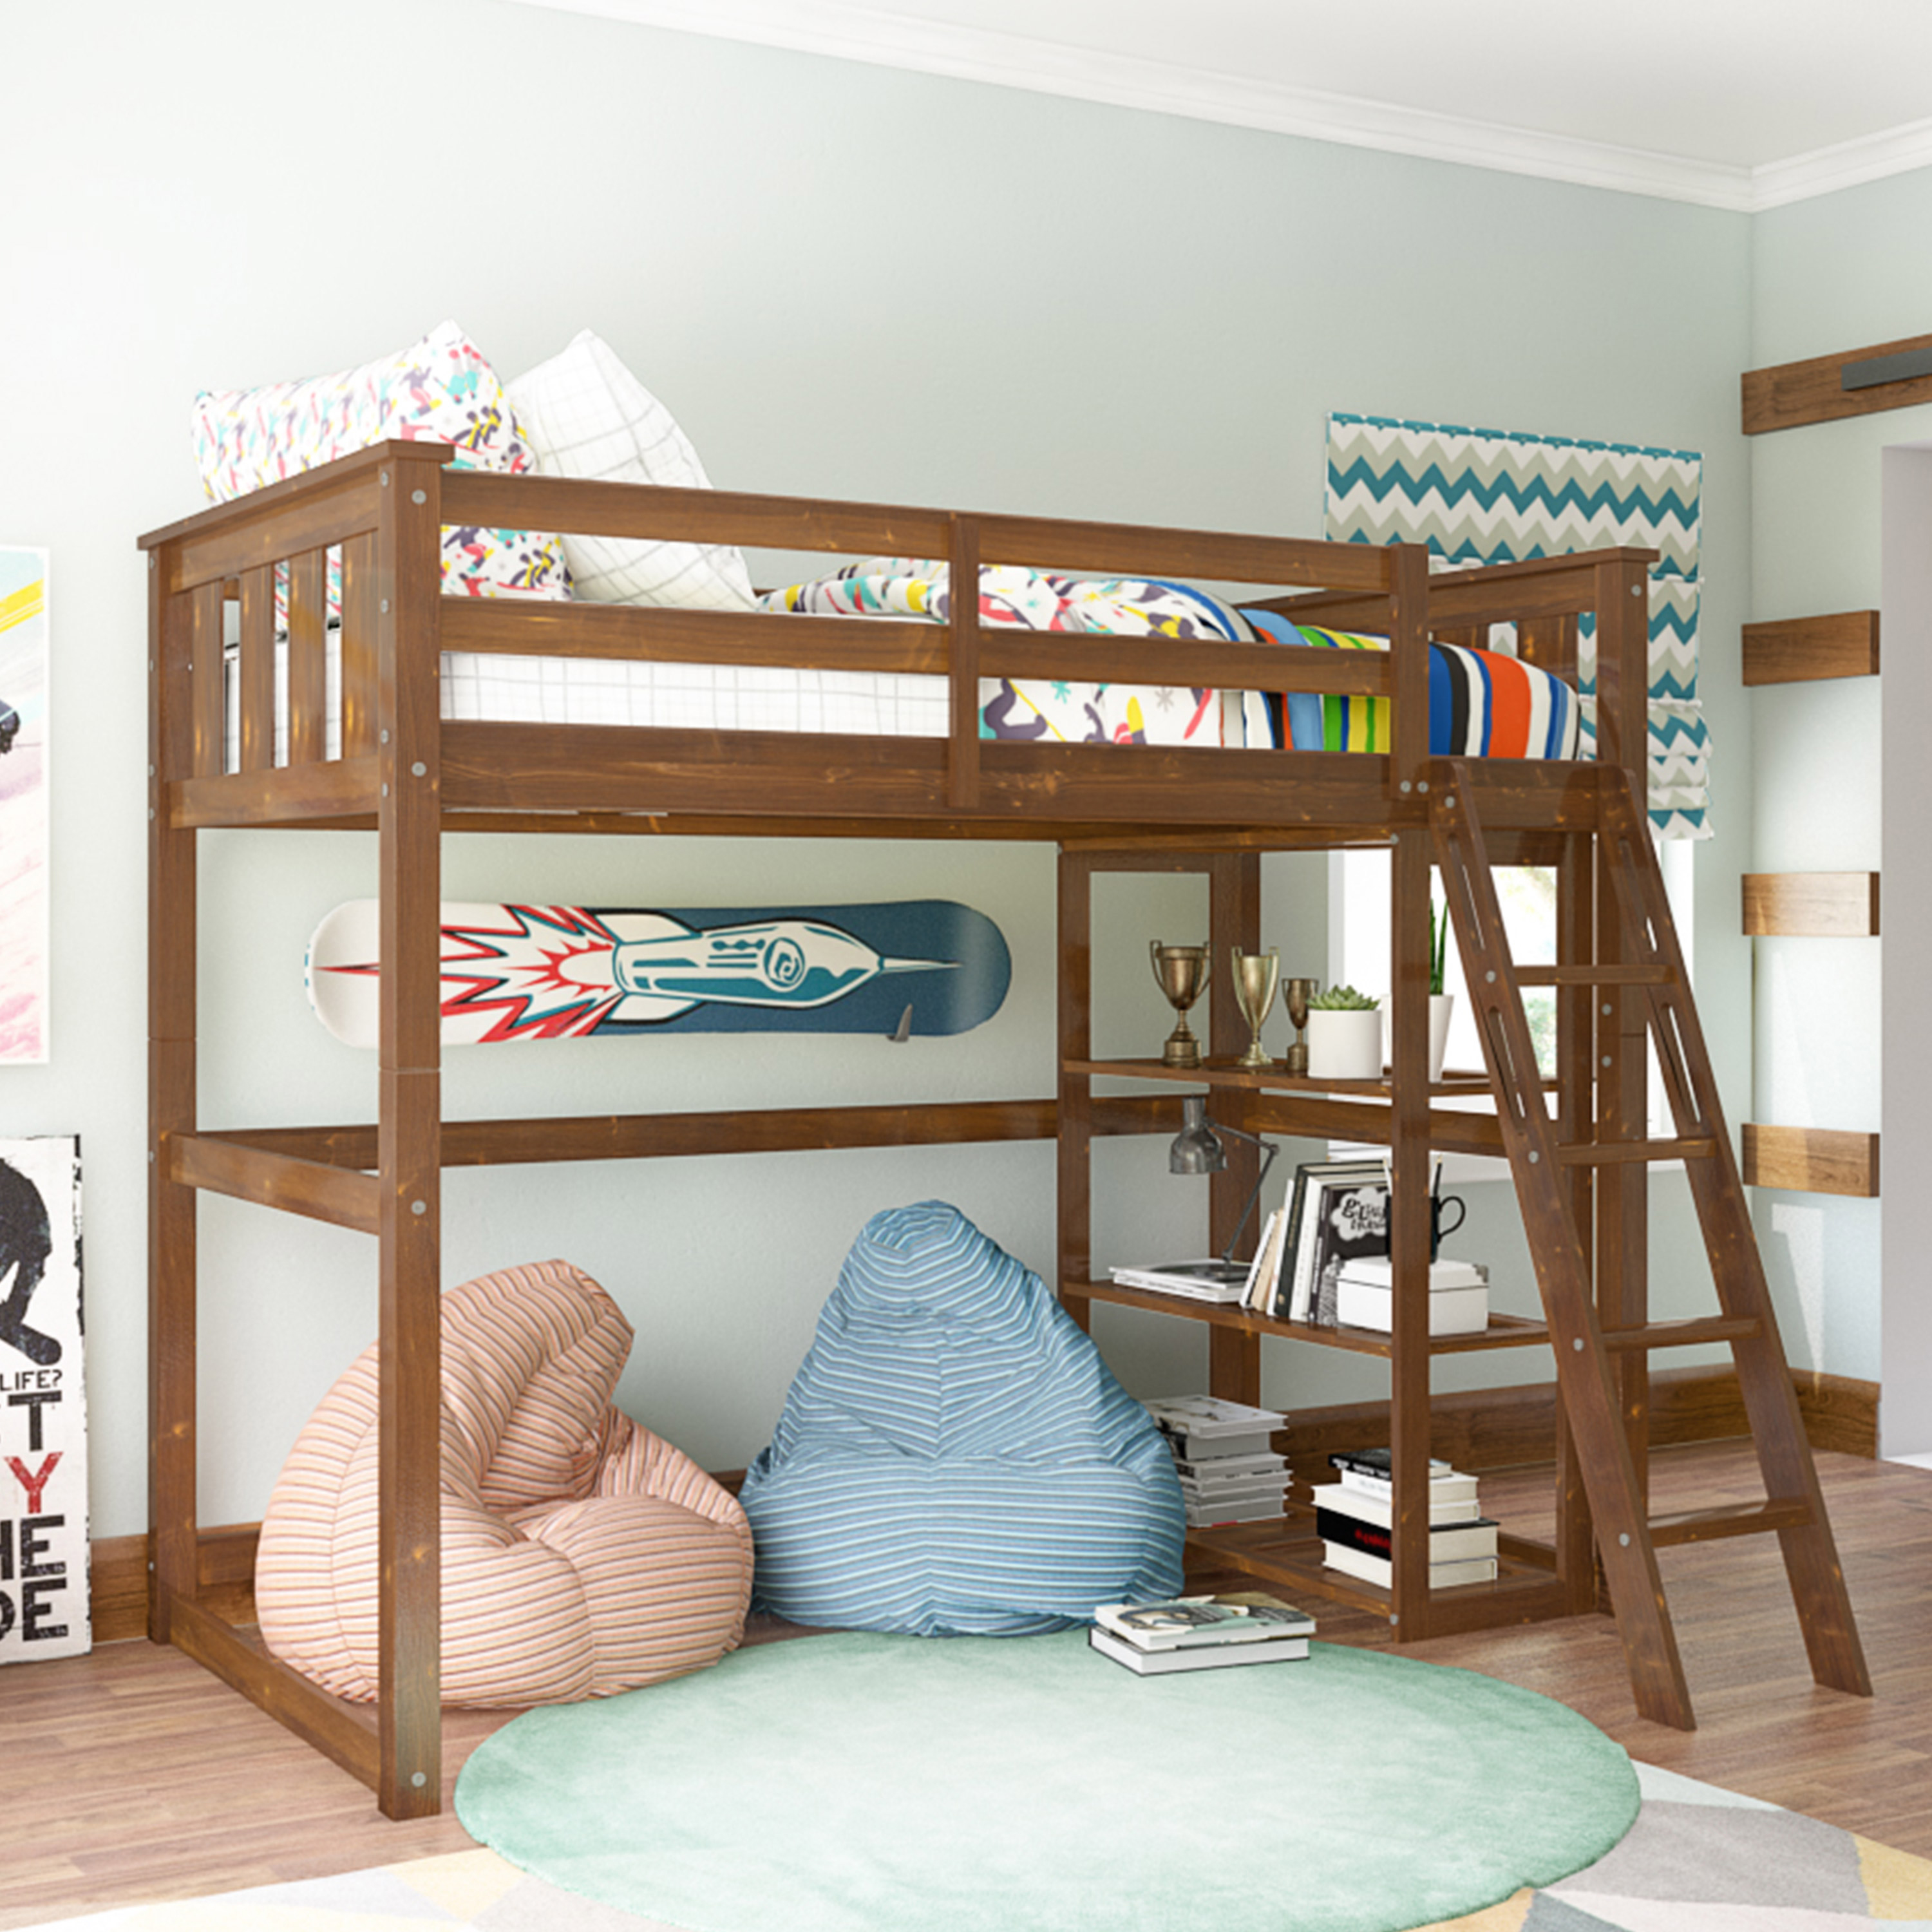 Better Homes Gardens Kane Twin, What Is The Weight Limit For Loft Beds